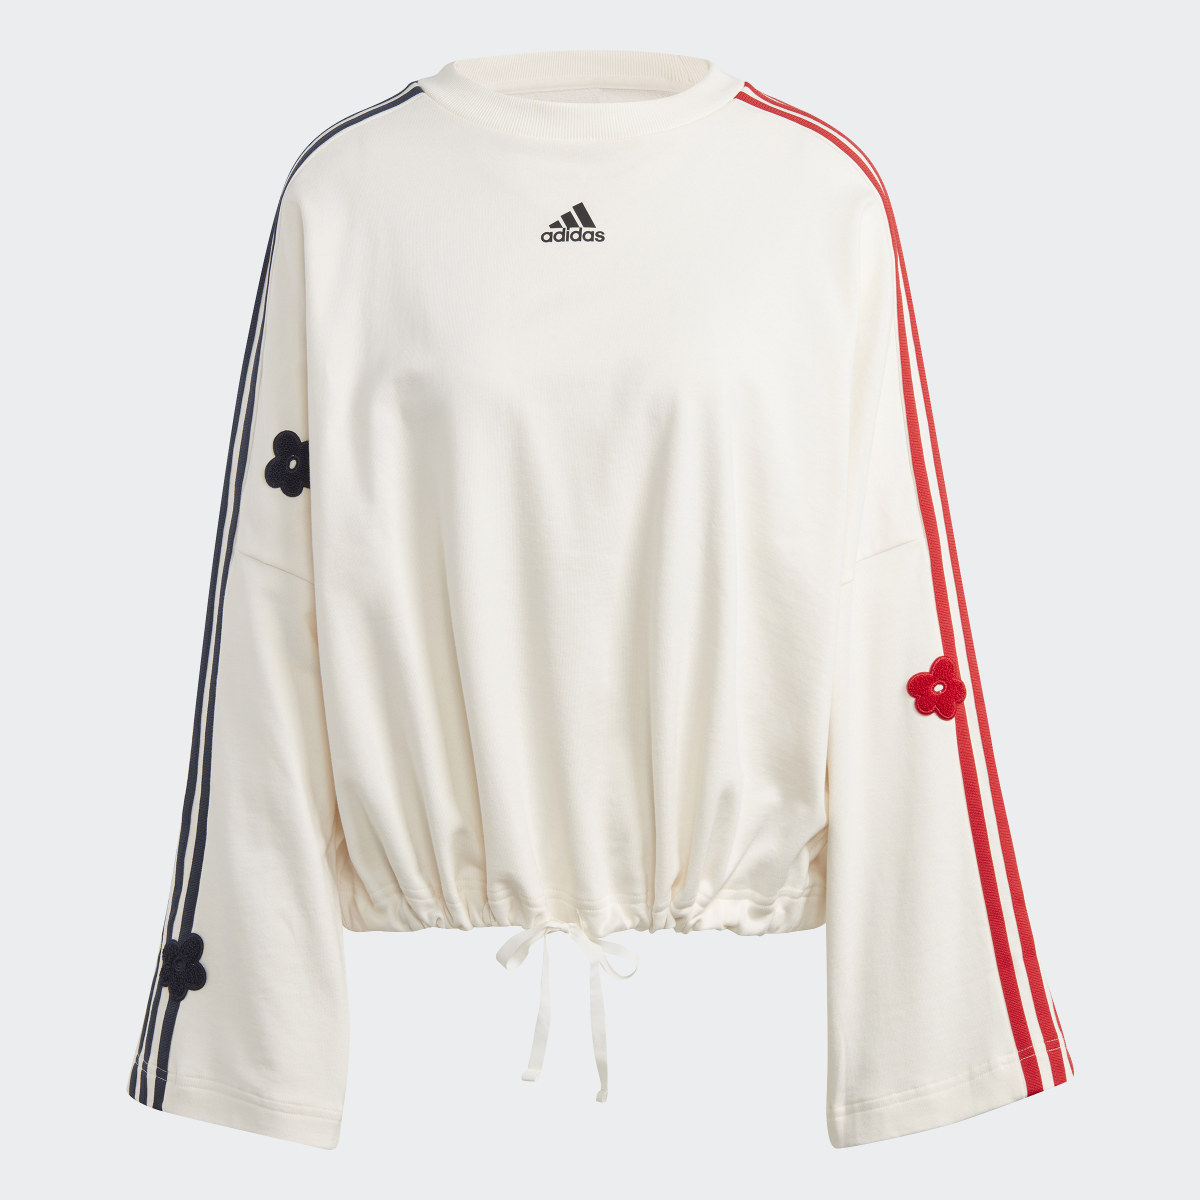 Adidas 3-Stripes Sweatshirt with Chenille Flower Patches. 5